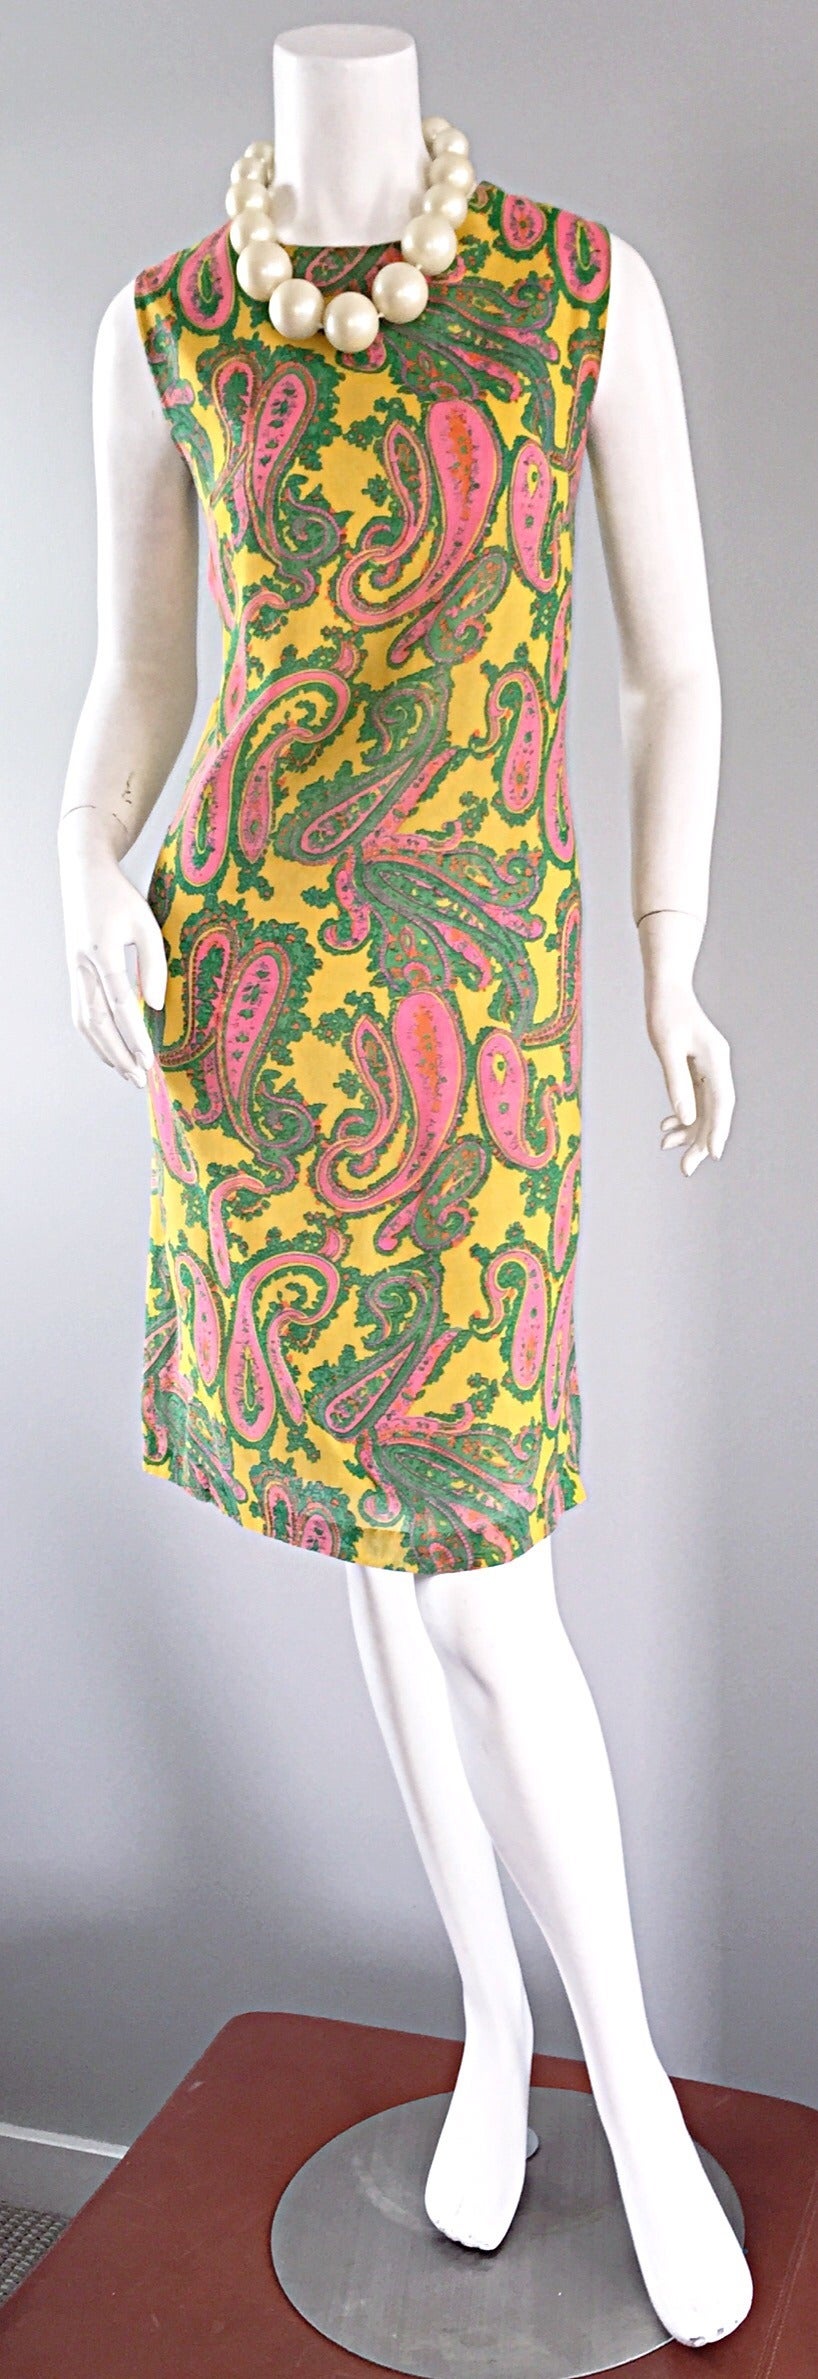 1960s Yellow  Large Size Pink Green Paisley Mod Retro Vintage Cotton Shift Dress For Sale 2